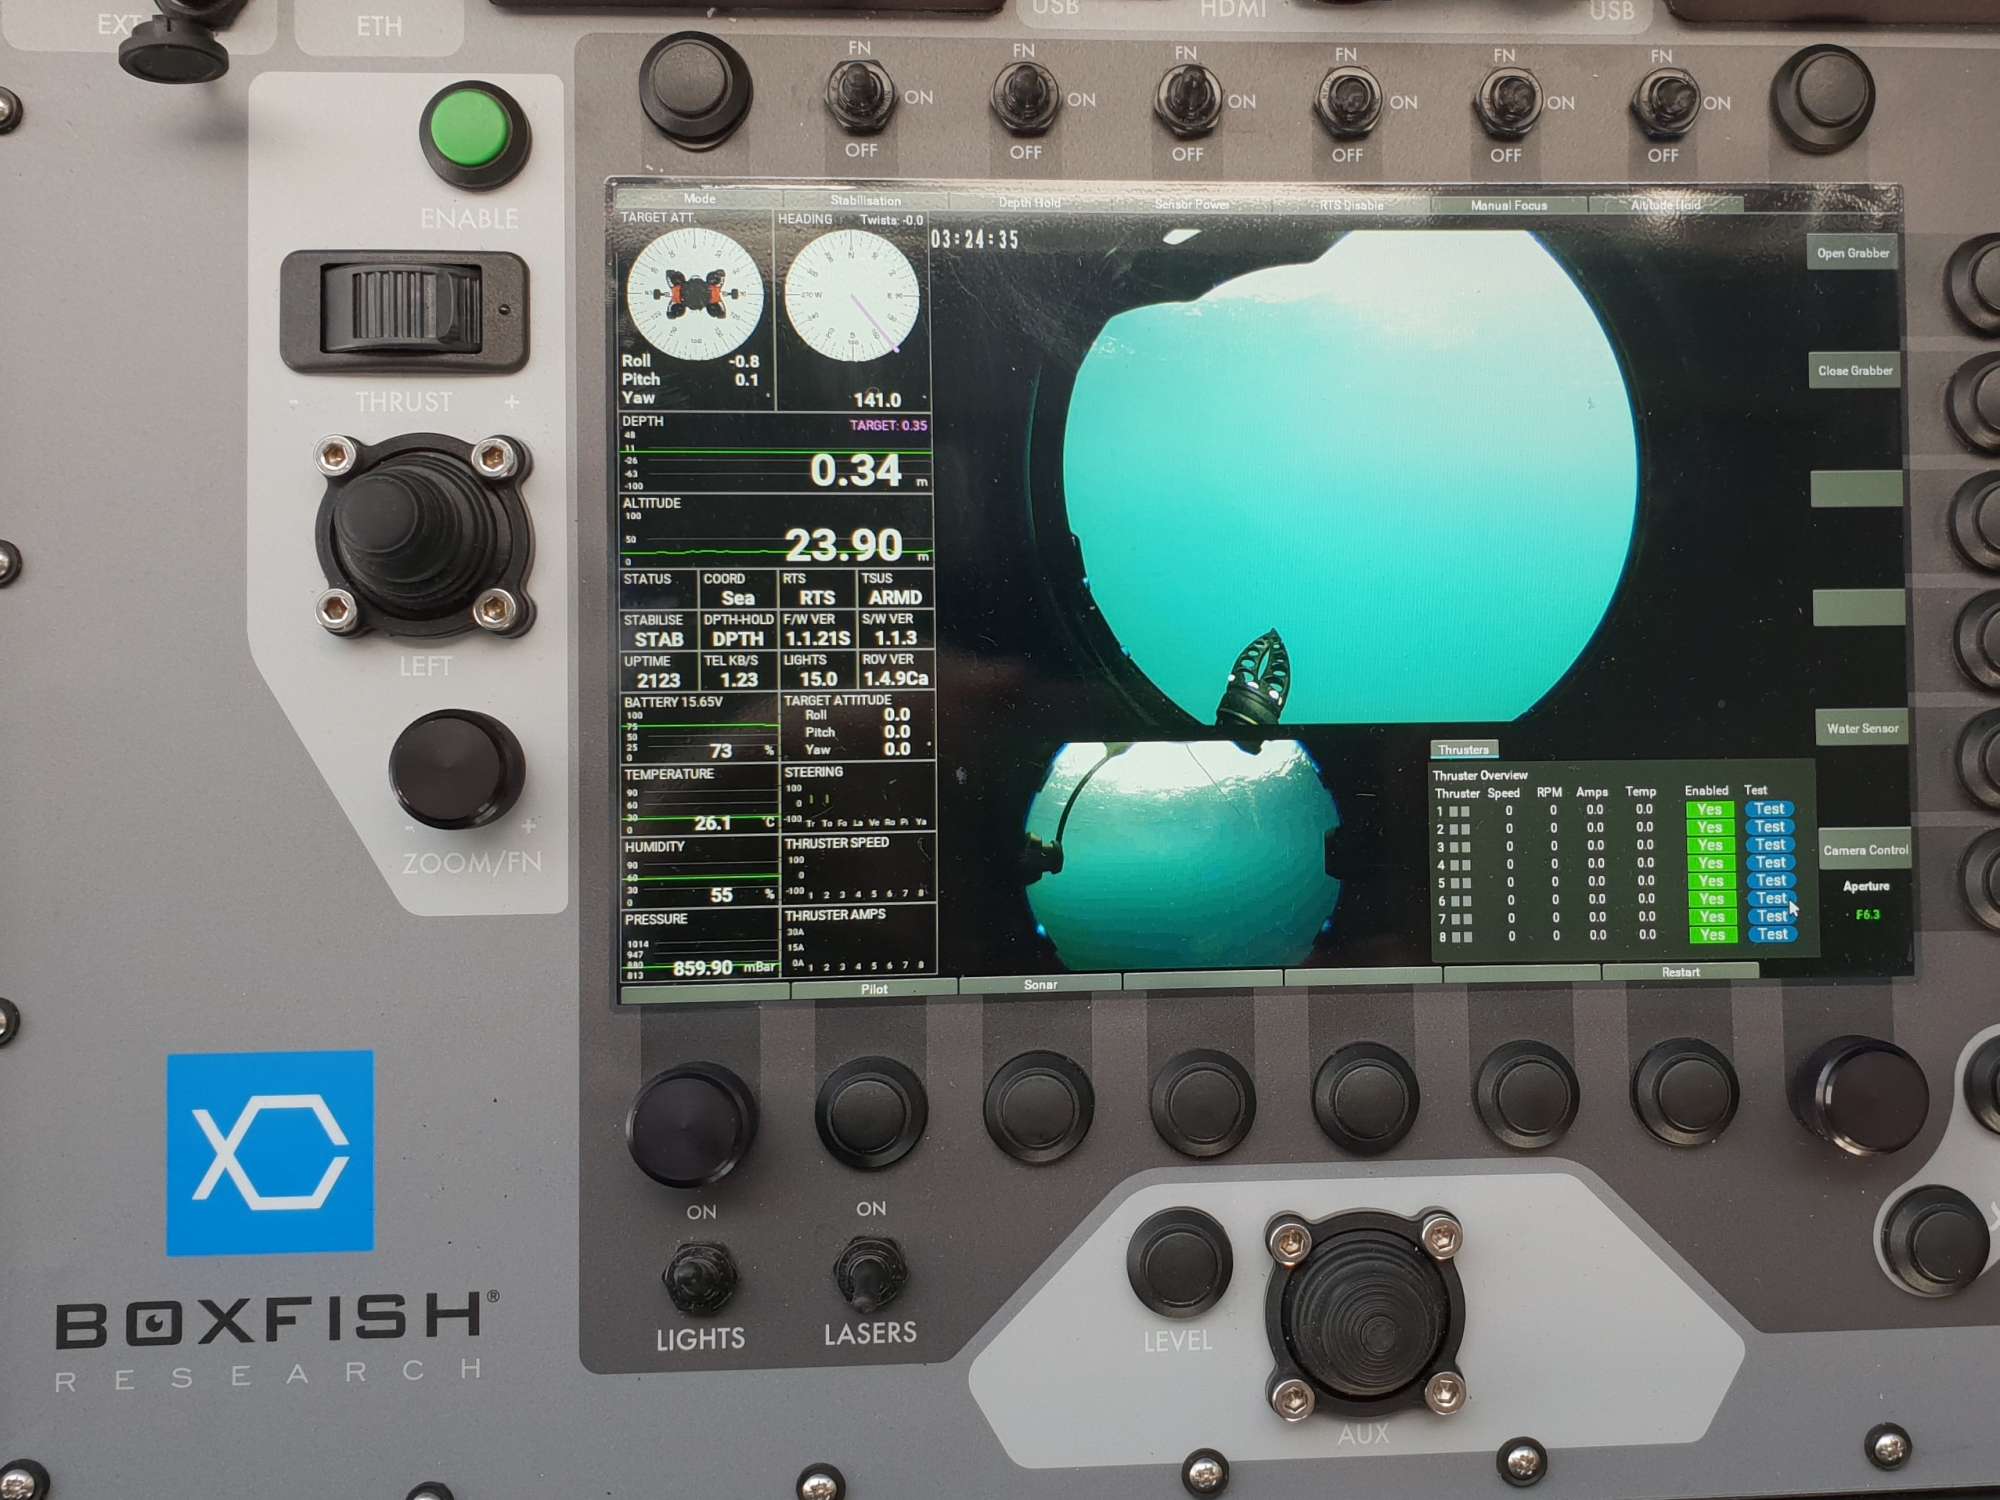 A Boxfish ROV Grabber Pictured on the Console Telemetry Screen